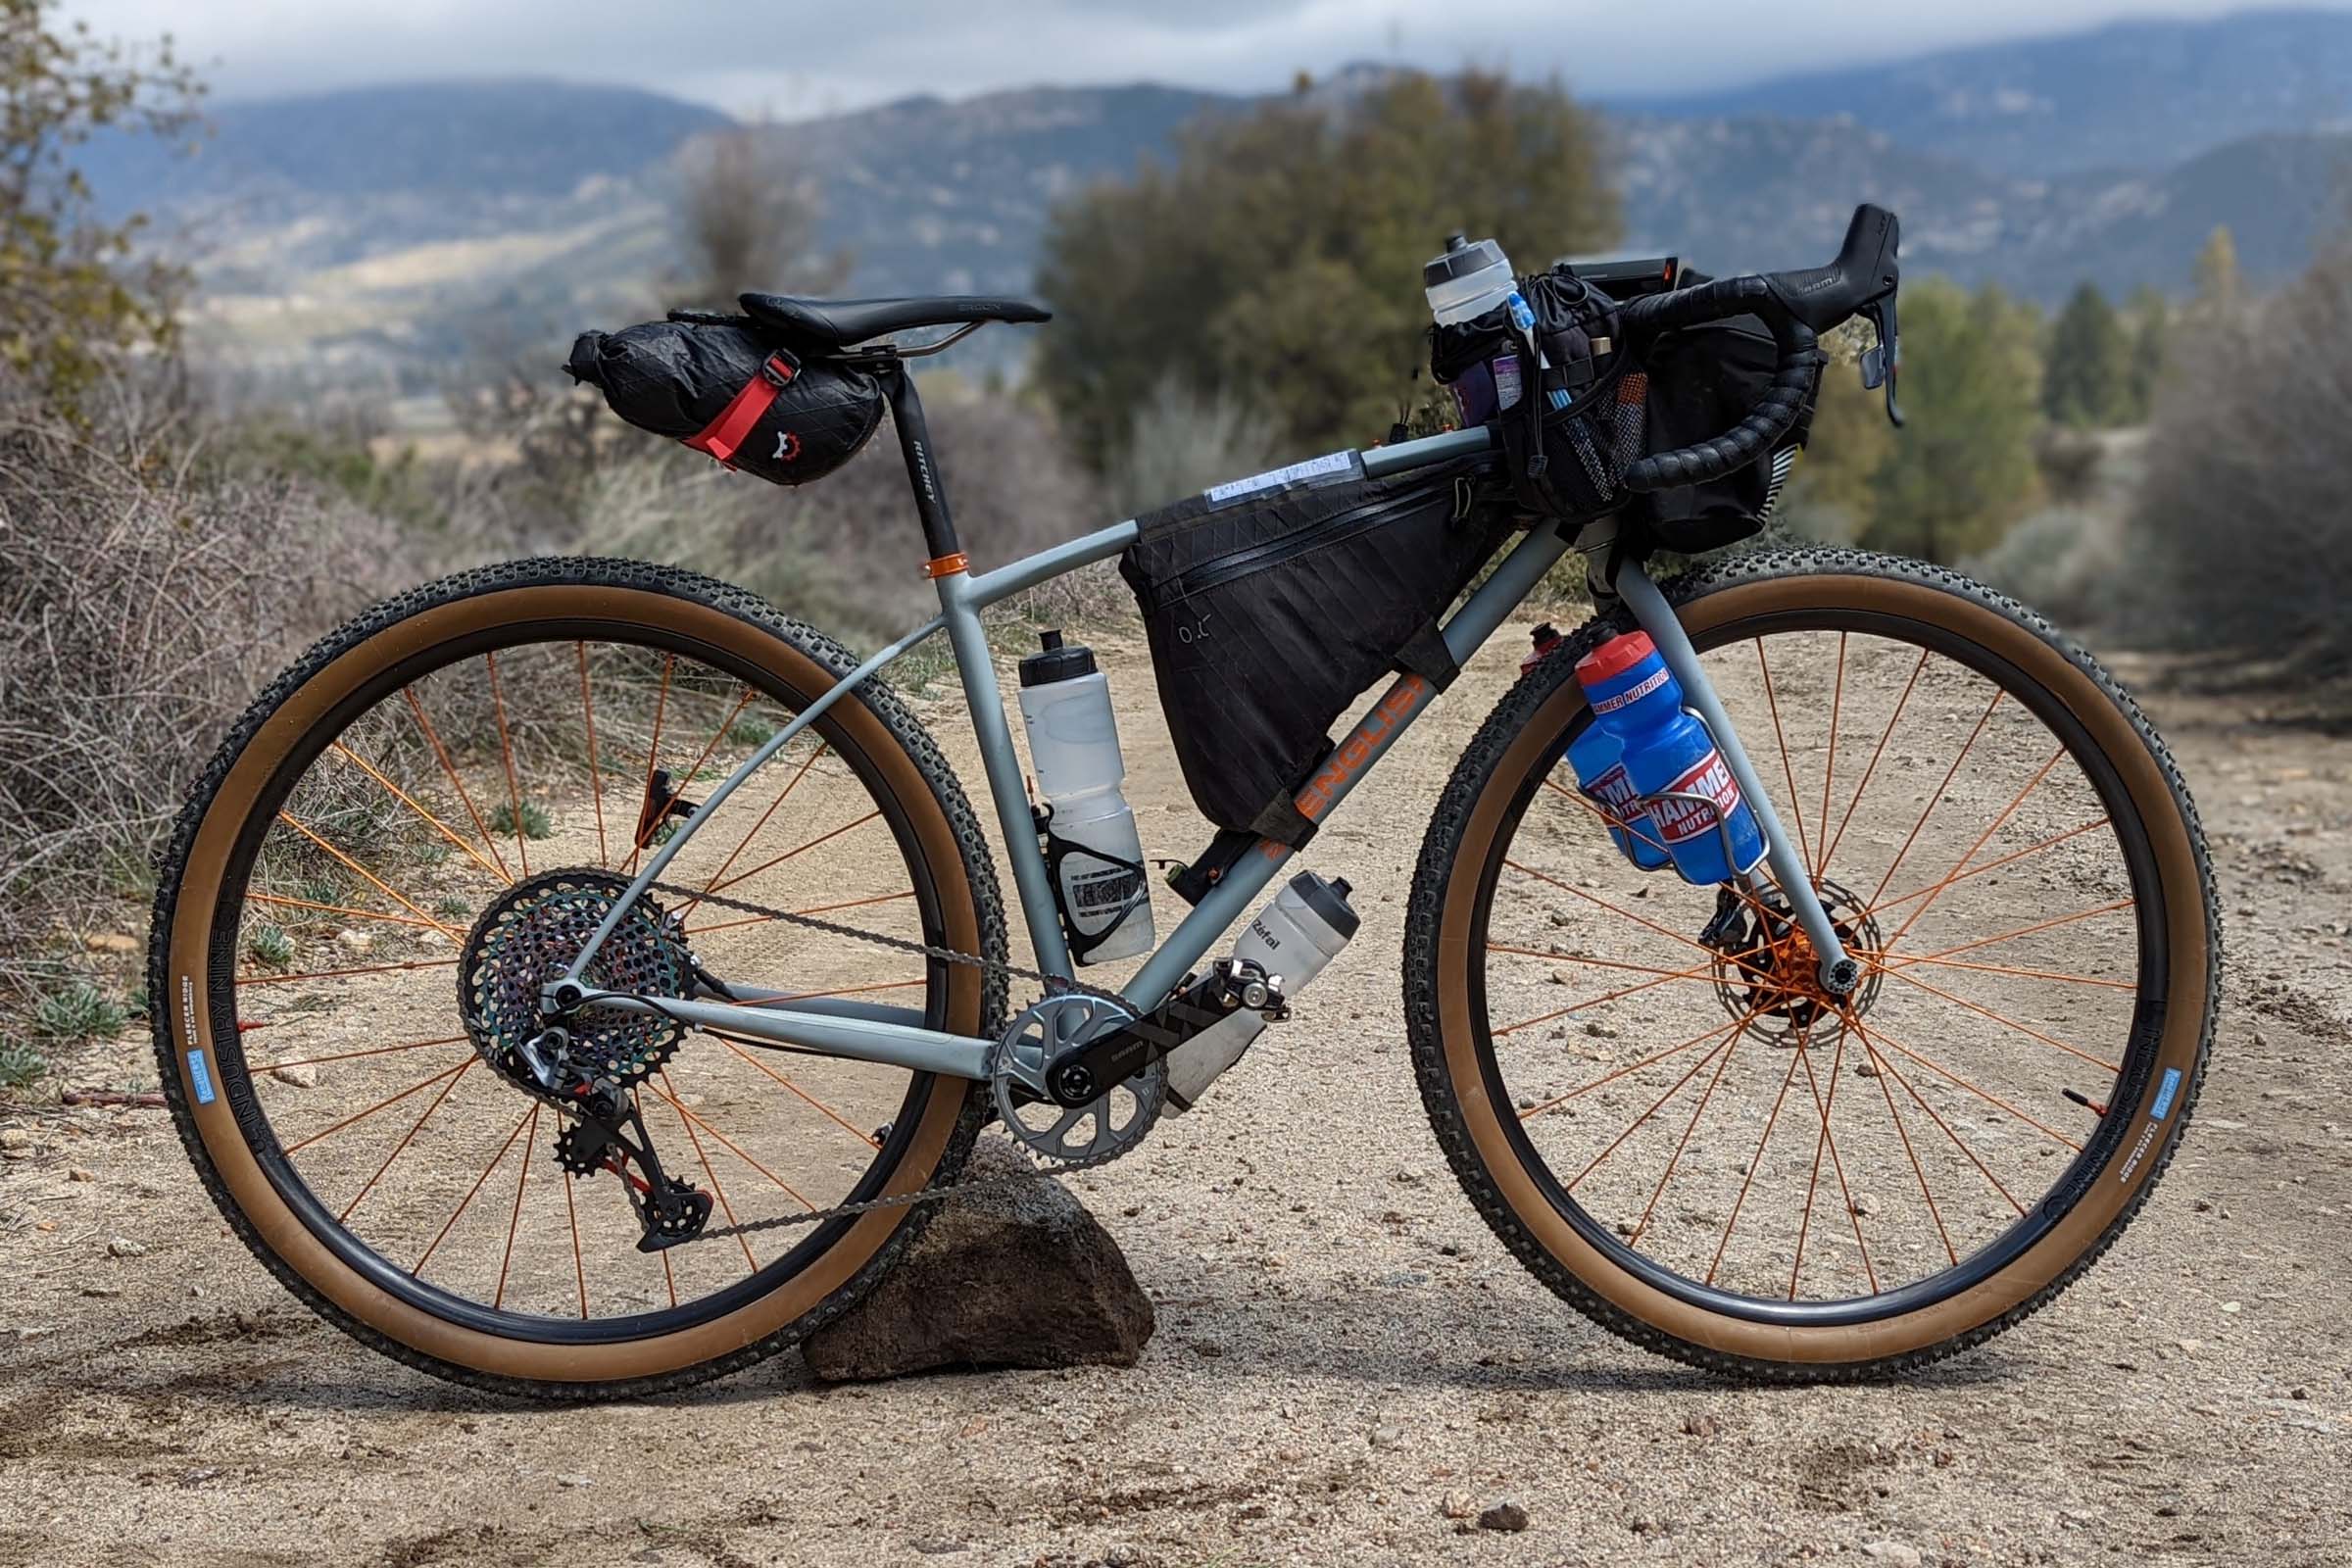 Rigs of the 2022 Stagecoach 400 - BIKEPACKING.com